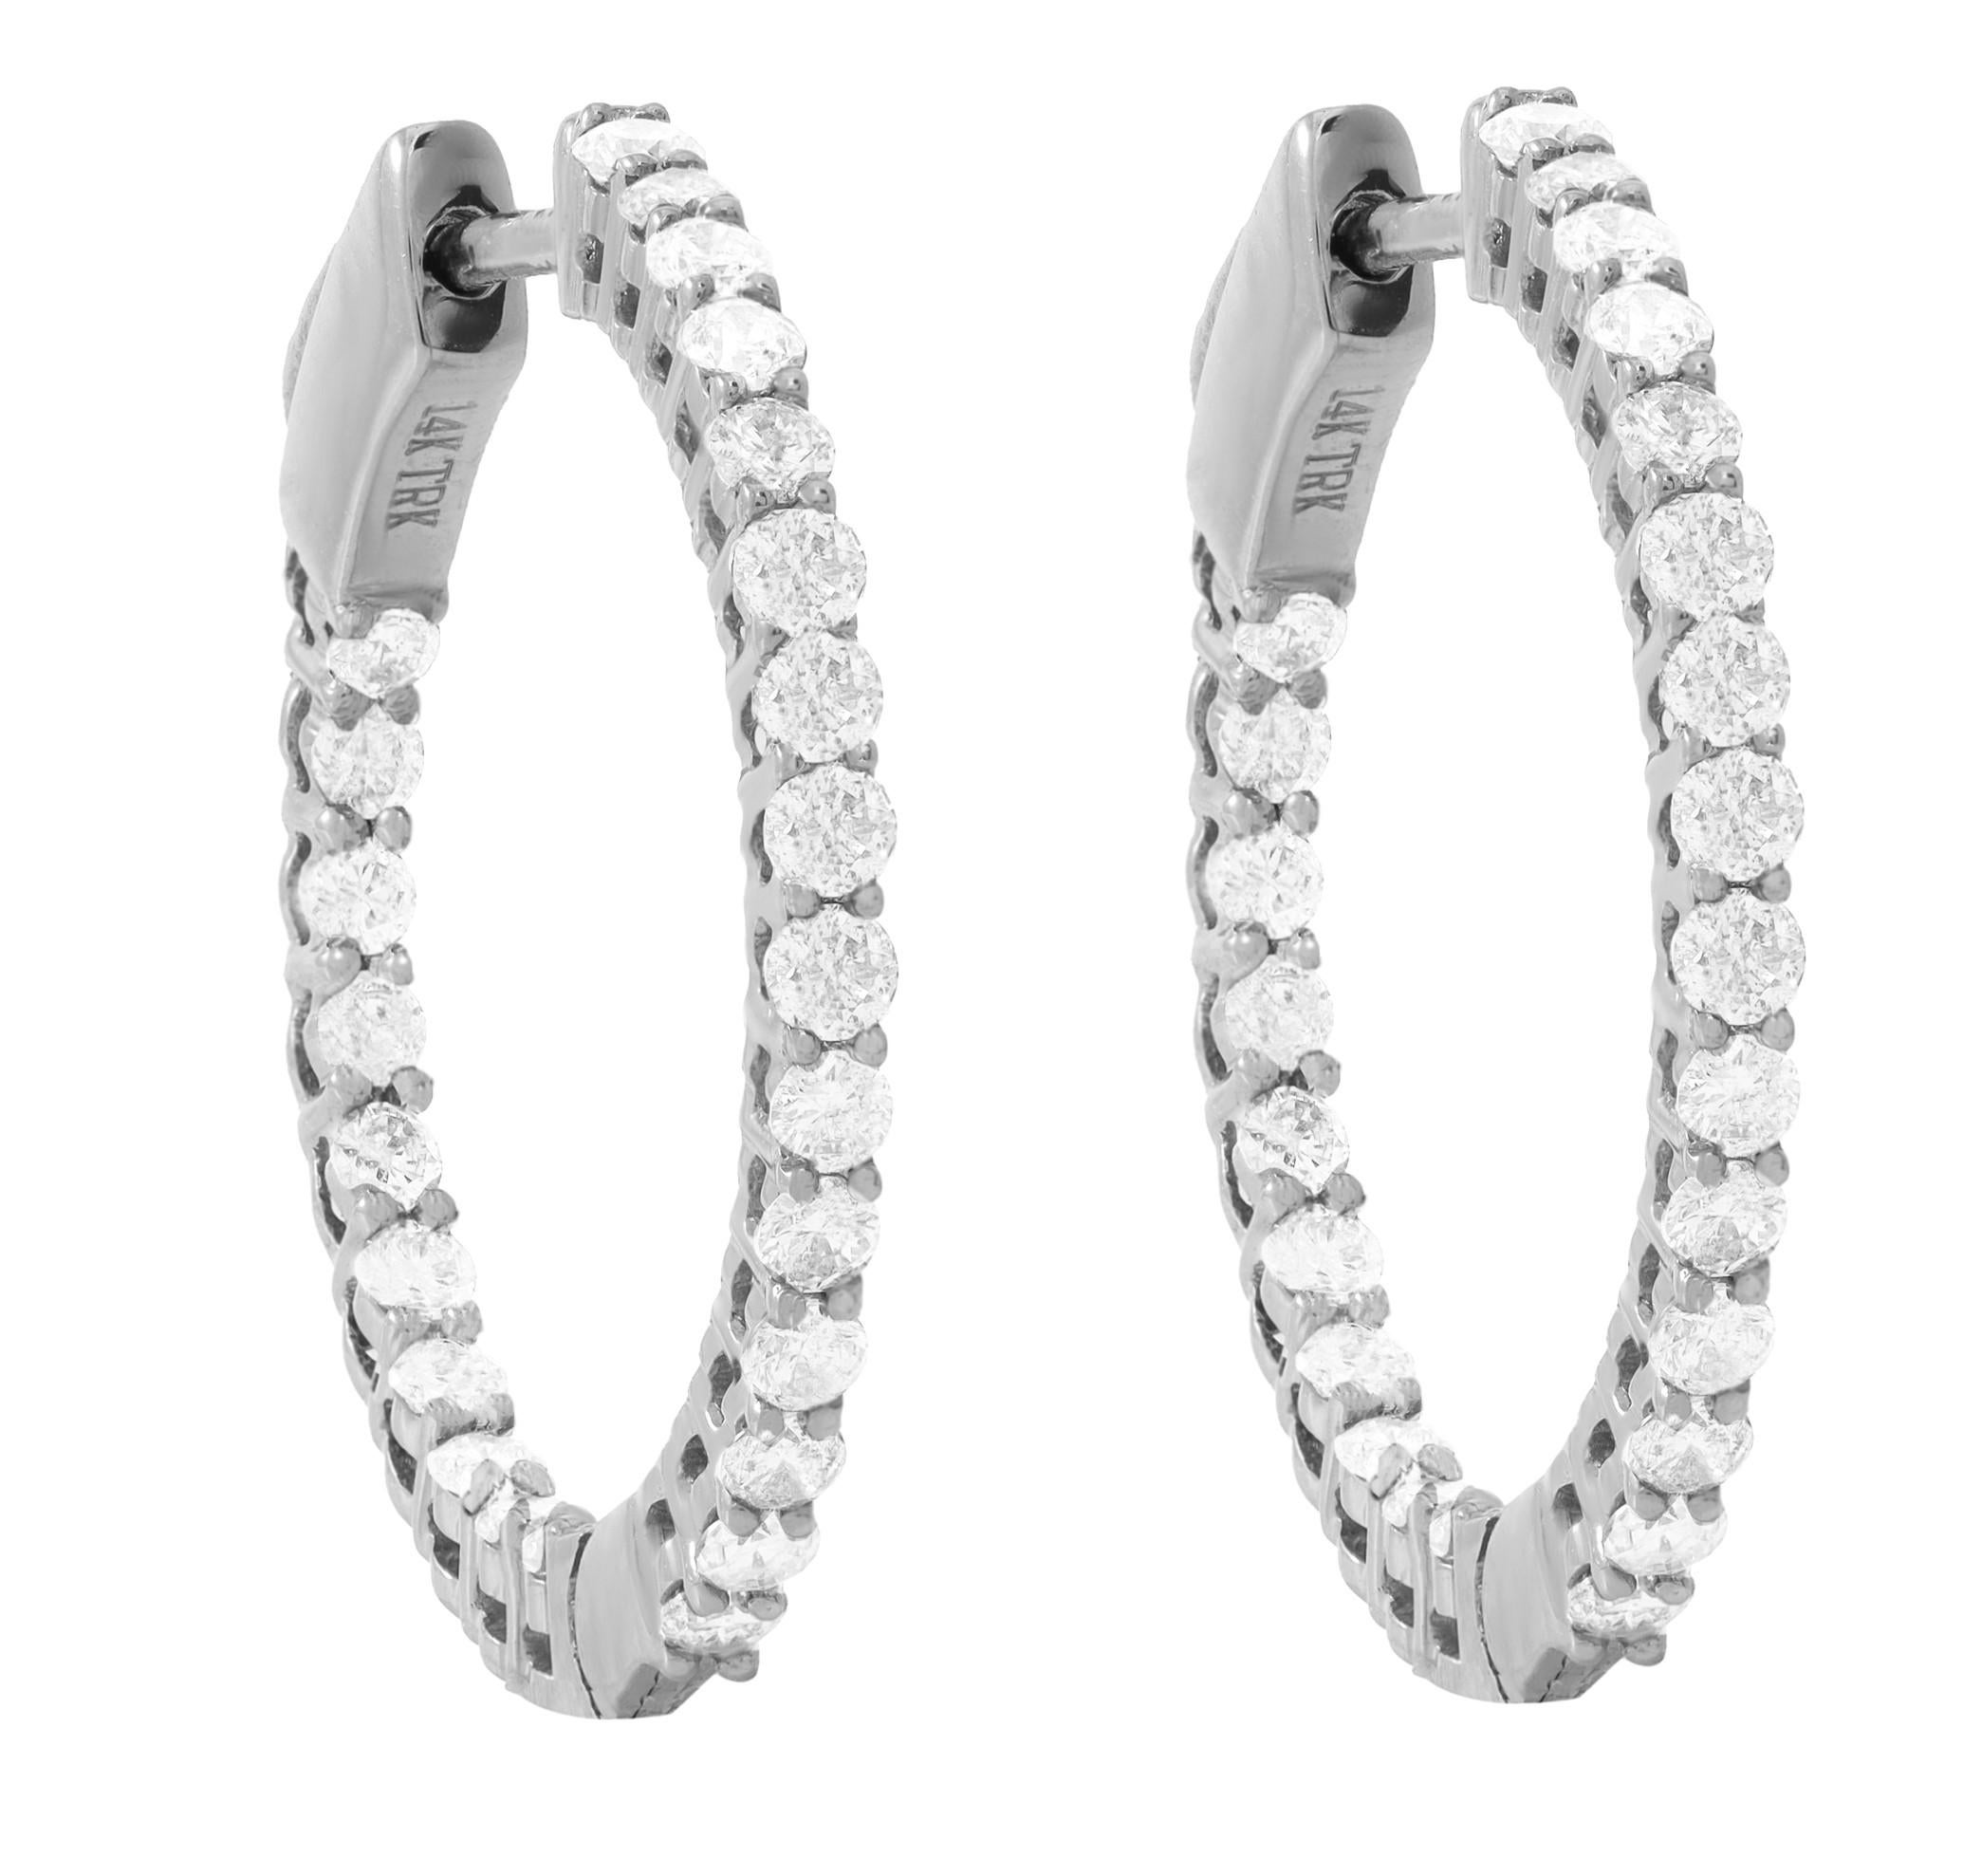 14K White Gold Diamond Earrings featuring 1.00 Carat T.W. of Natural Diamonds

Underline your look with this sharp 14K White Gold Diamond Hoop Earrings. High quality Diamonds. This Earrings will underline your exquisite look for any occasion.

. is